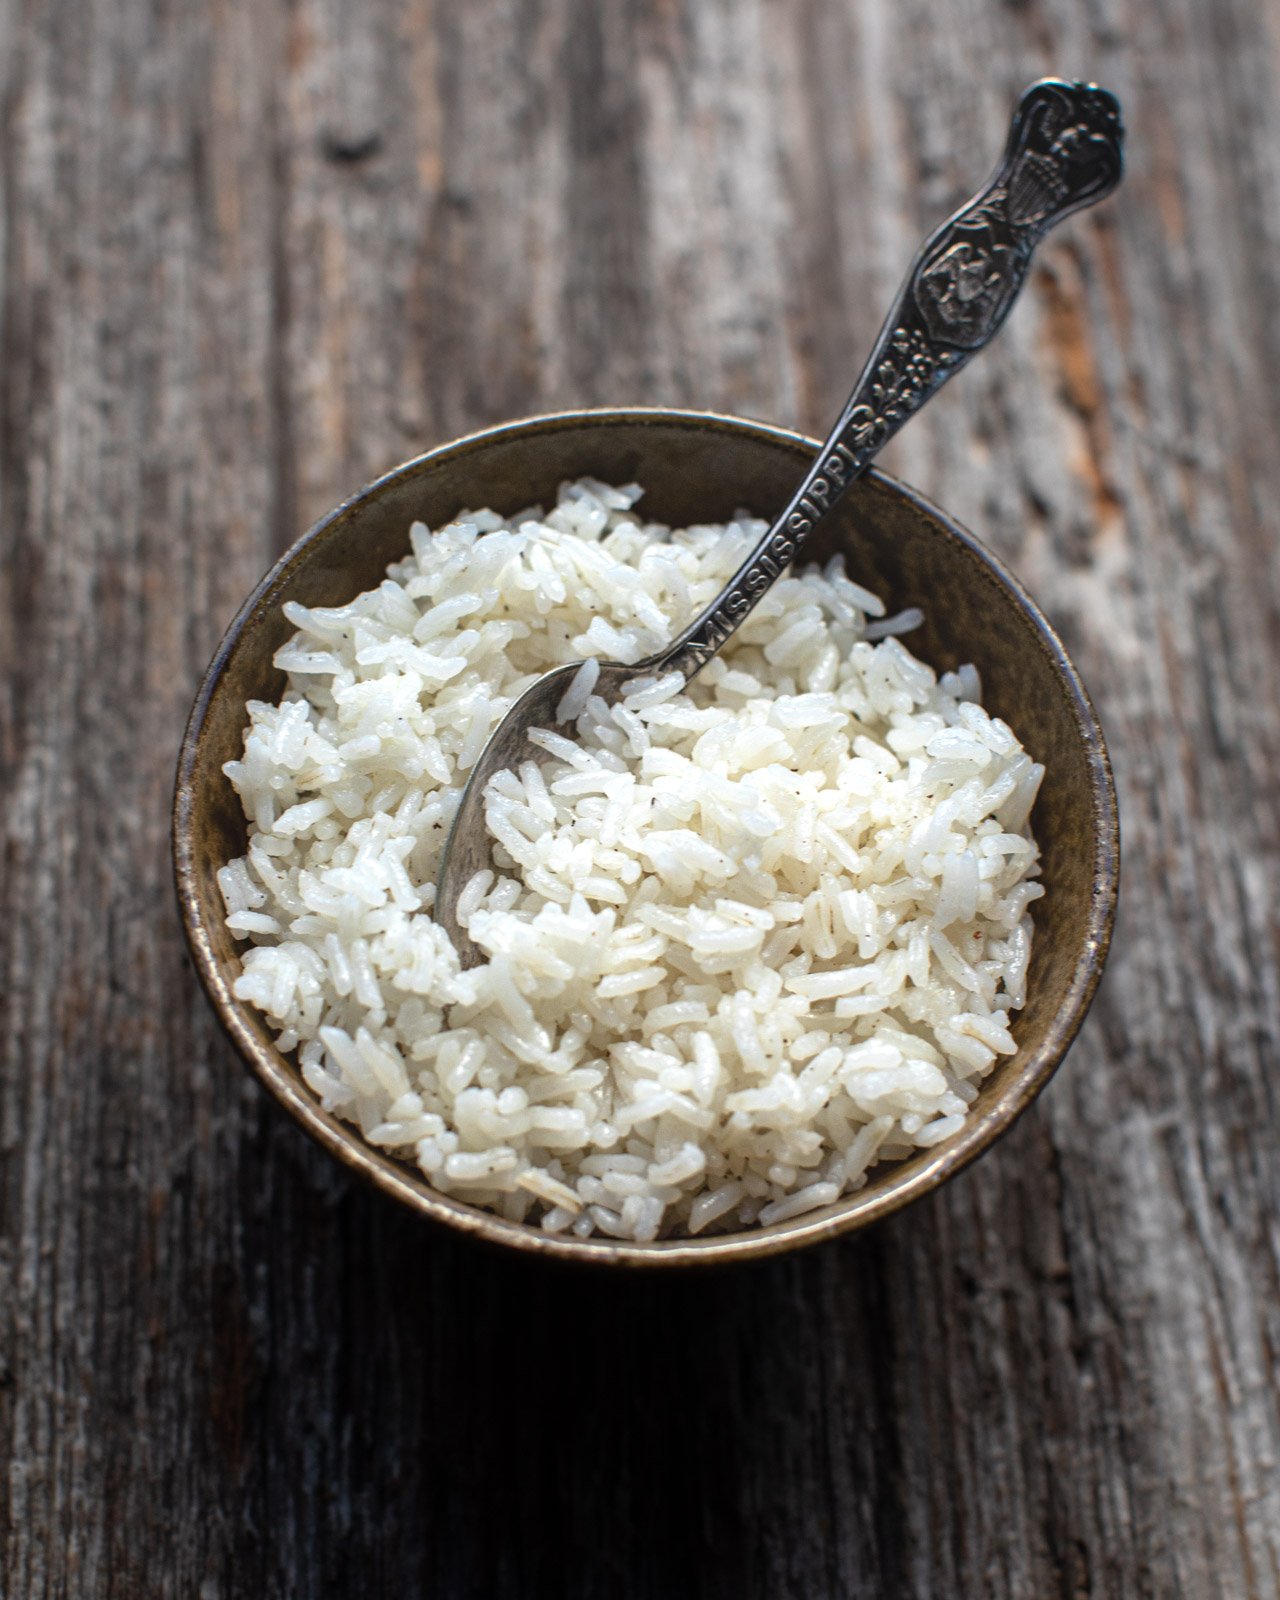 Rice Grain PNG Image, A White Rice Food Grain, A Grain Of White Rice, Food,  Eaten PNG Image For Free Download